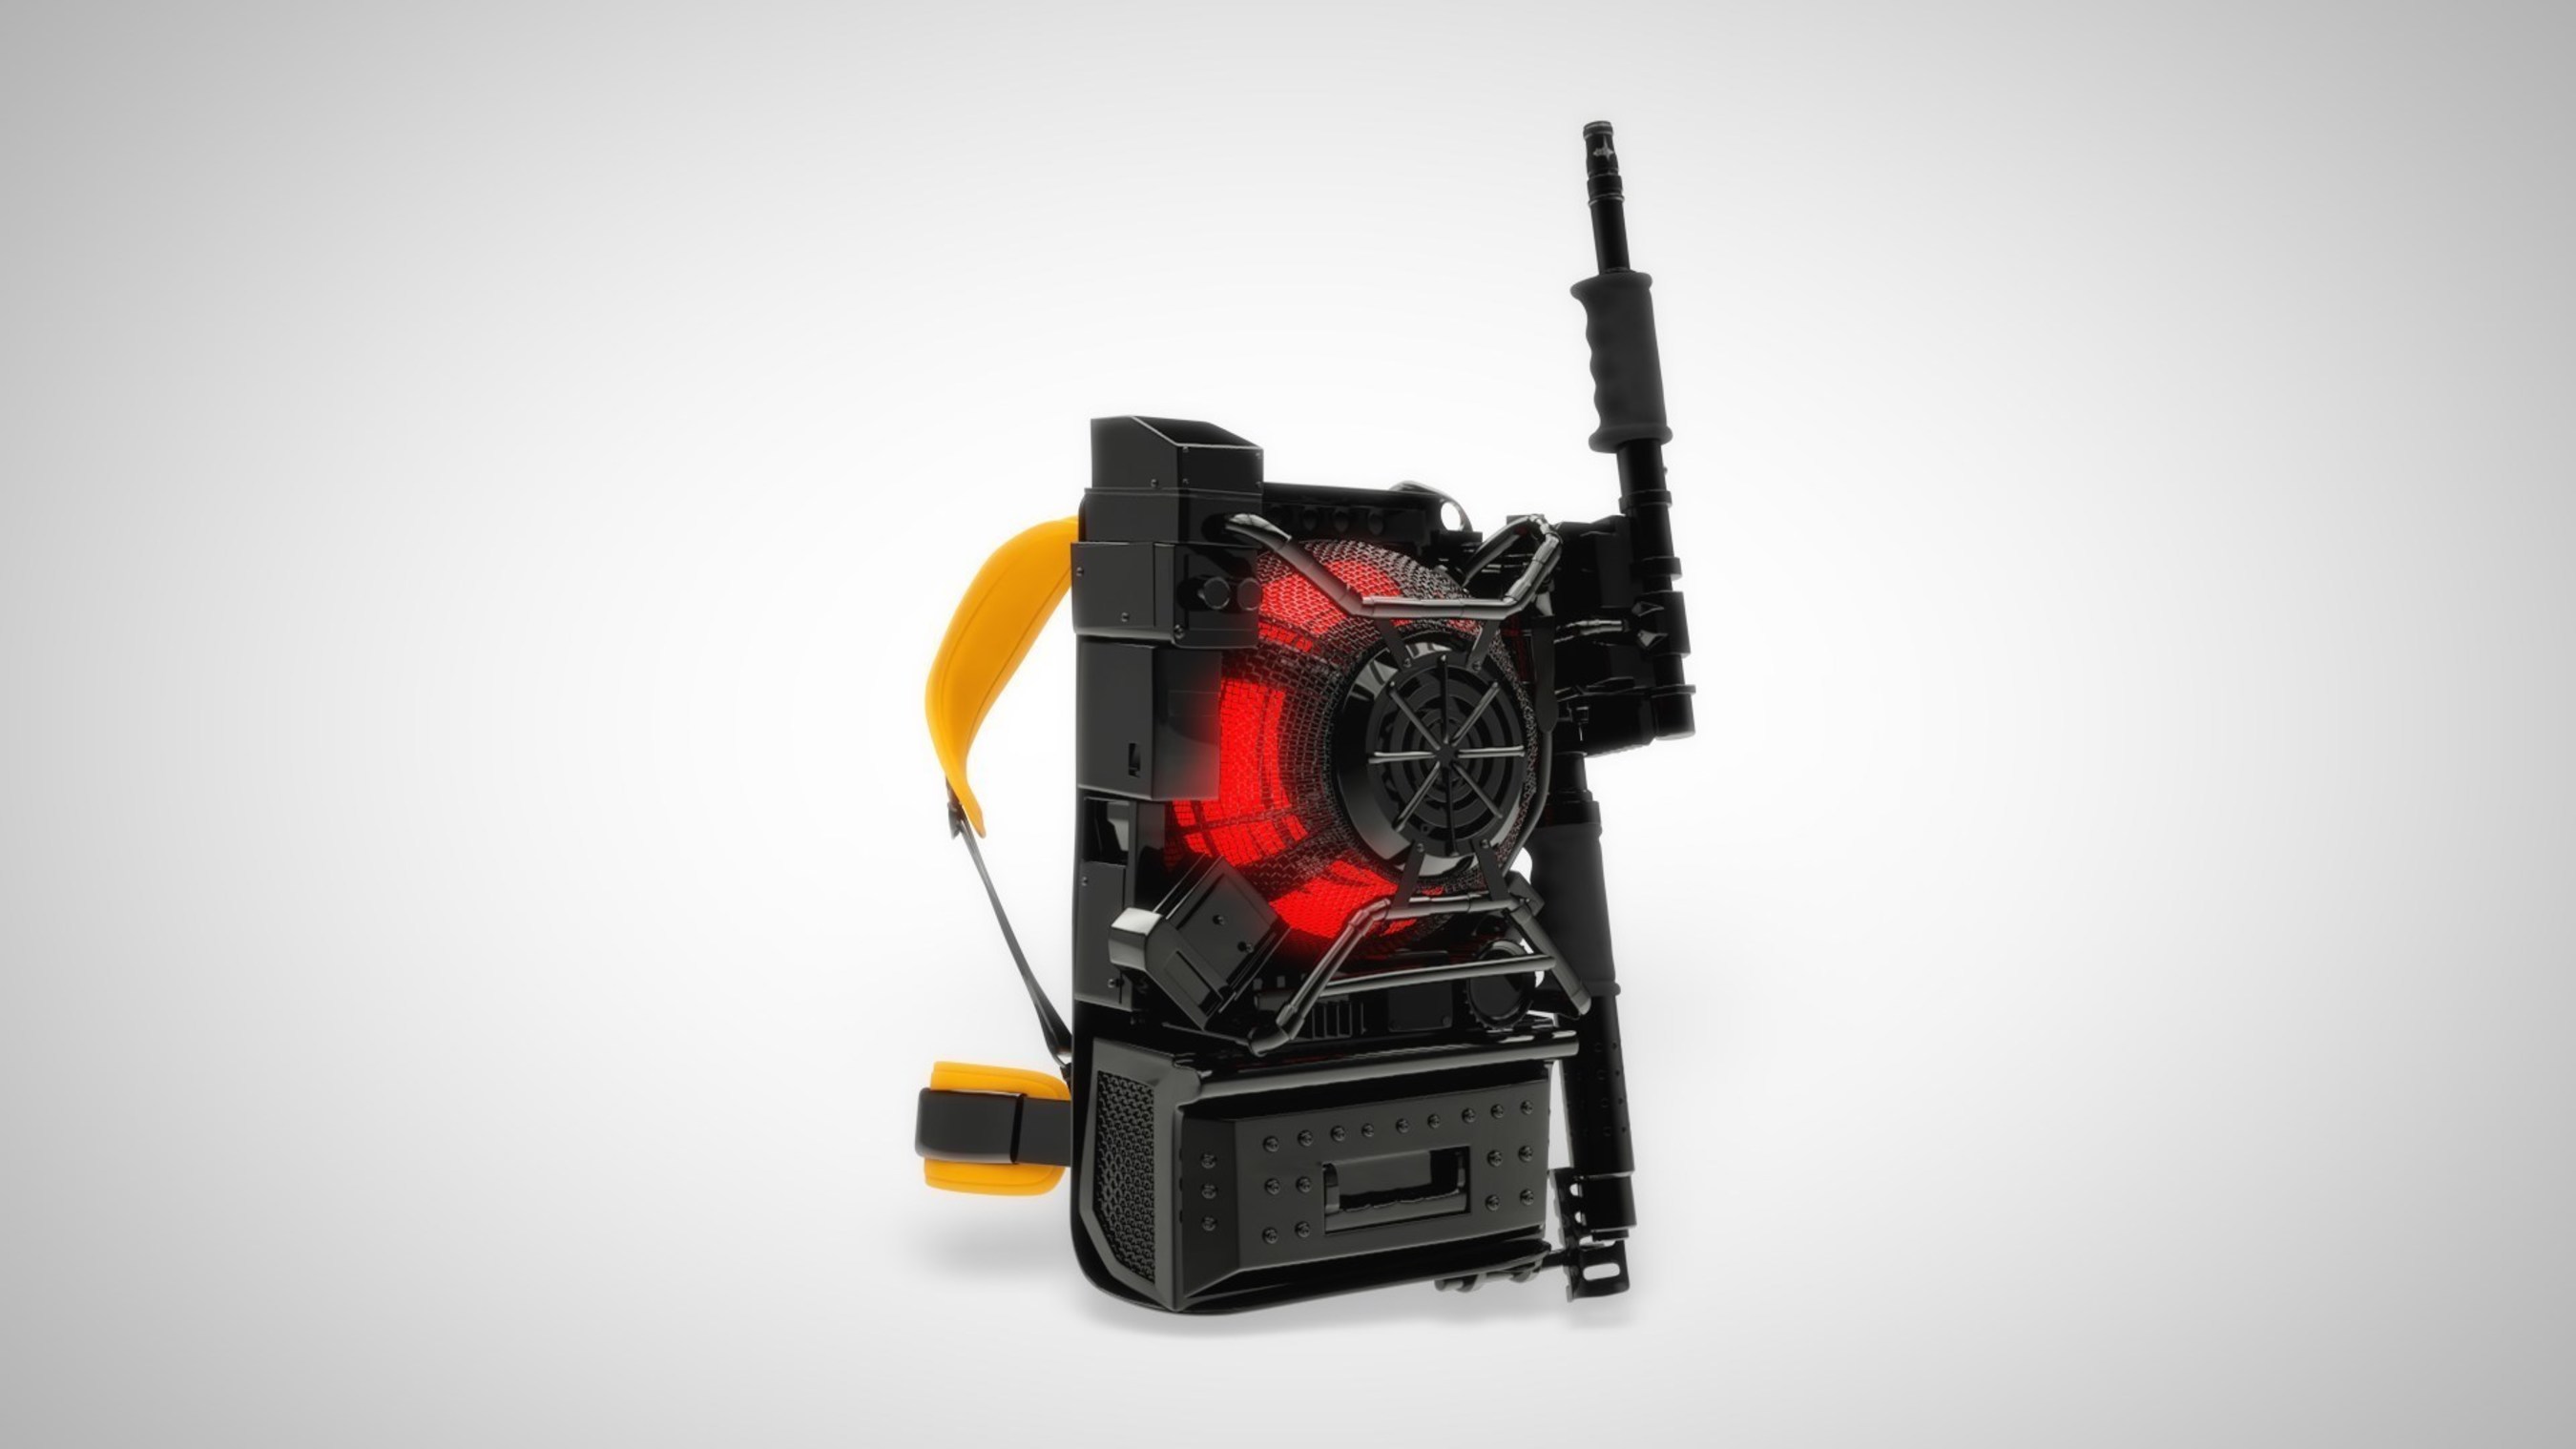 Sony develops the world's first ghost-catching device - The Proton Pack(TM).